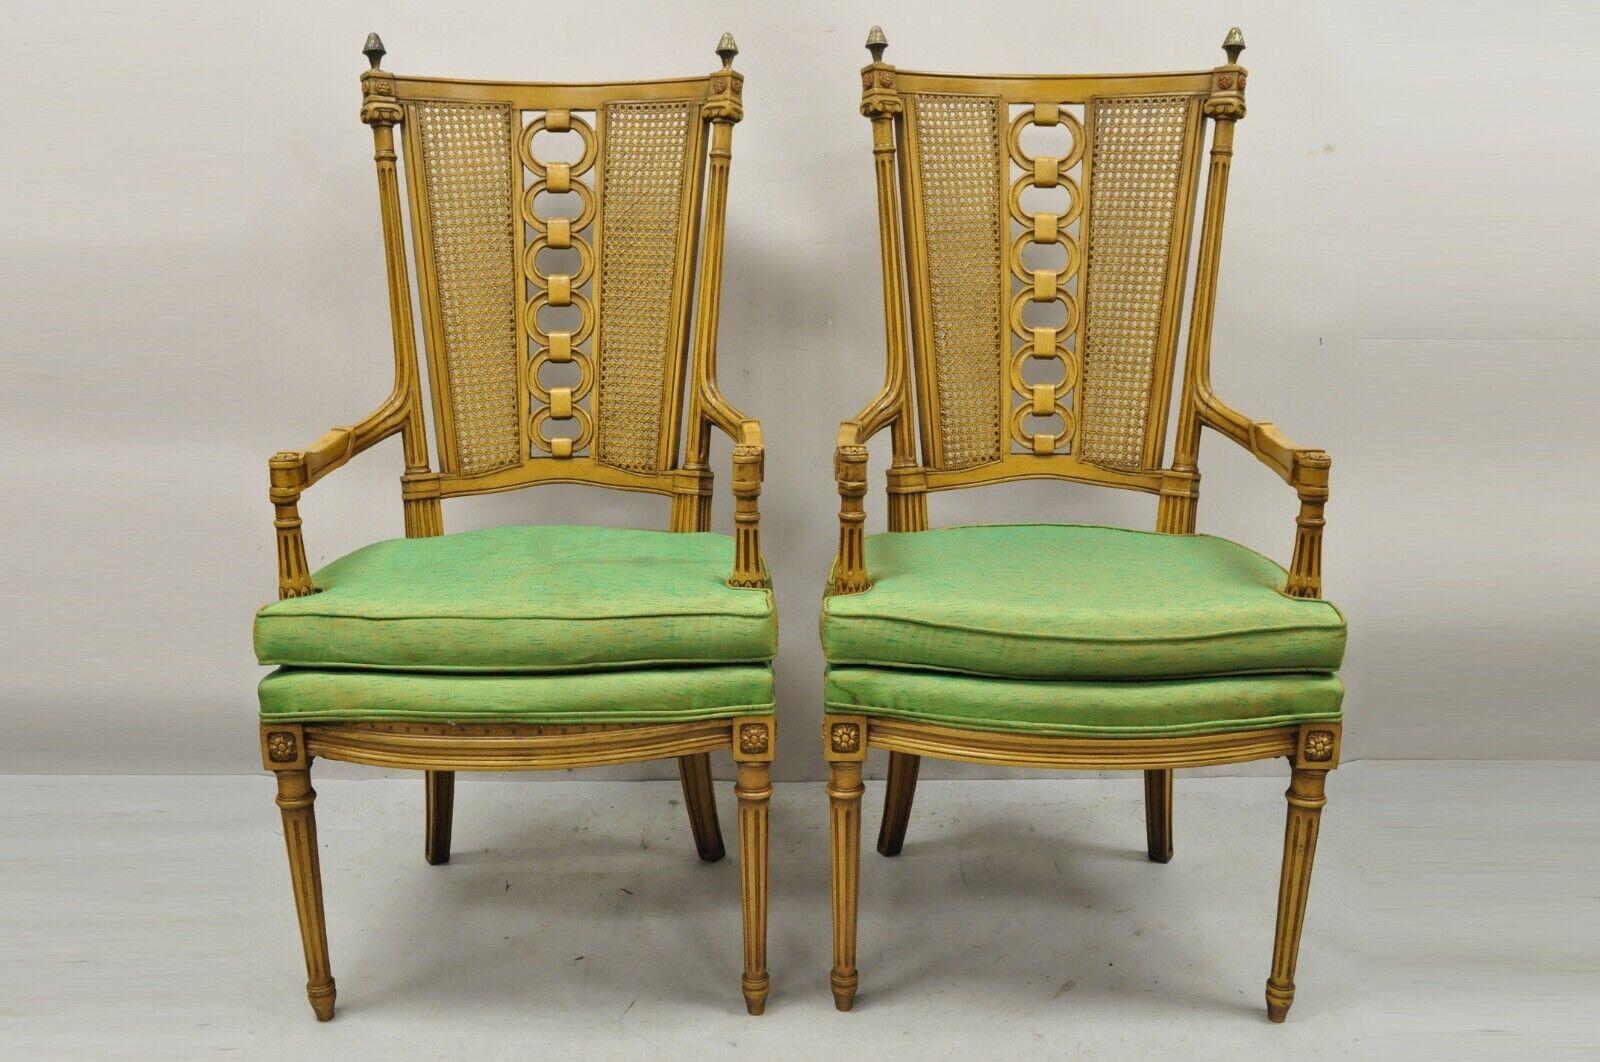 Vintage French Hollywood Regency tall cane back carved link chairs - a pair. Item features cane back, brass finials, solid wood frame, beautiful wood grain, nicely carved details, tapered legs, very nice vintage pair, great style and form. Circa Mid